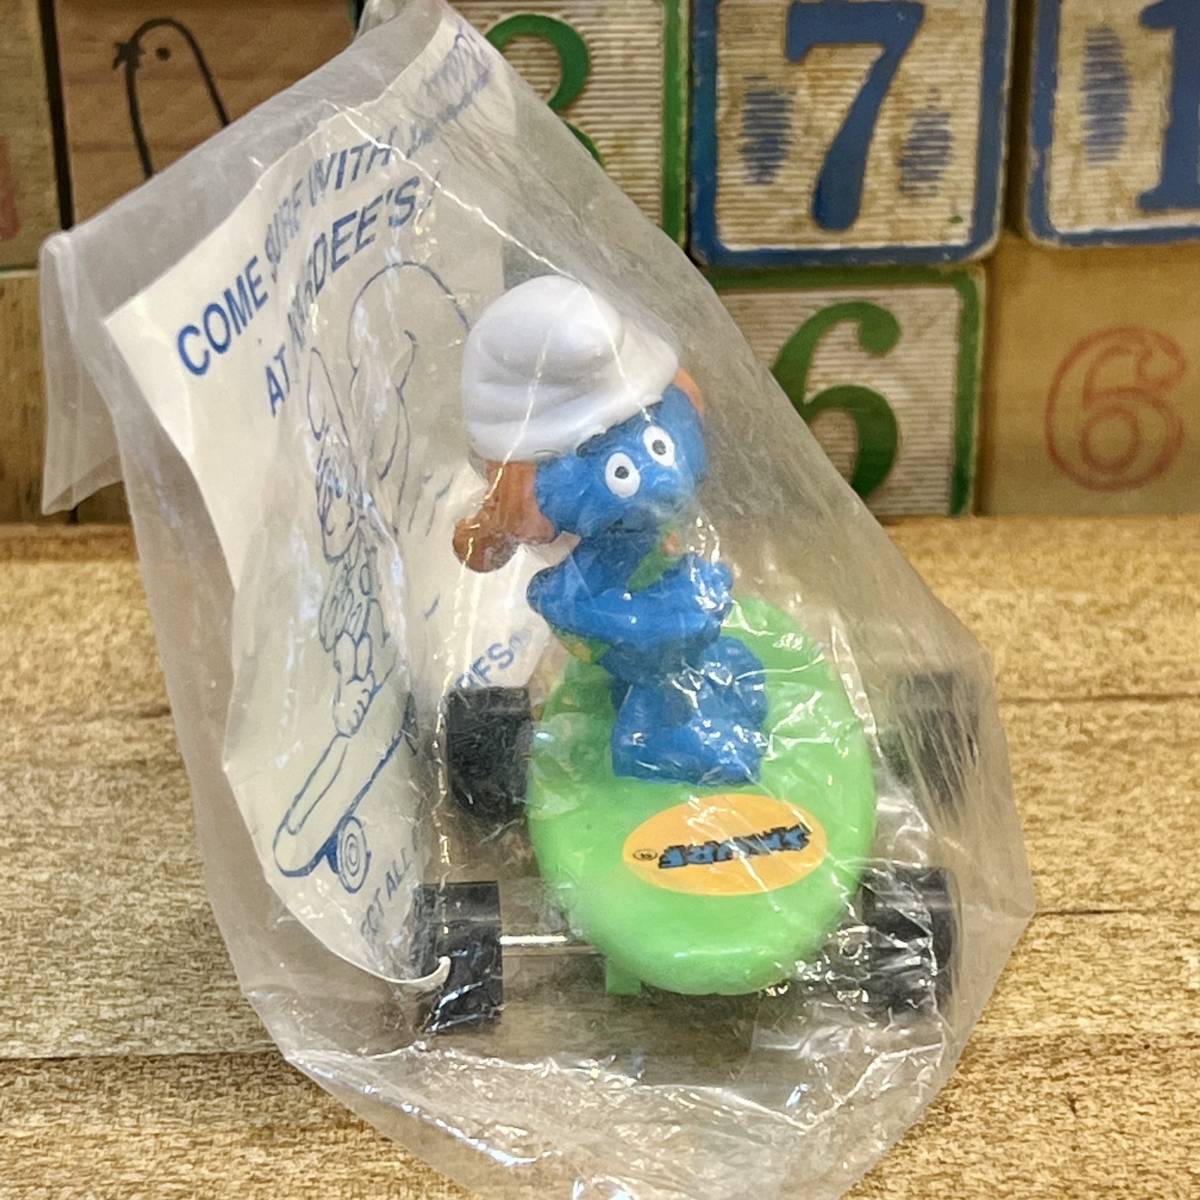 Come Surf with Smurf at Hardee’s スマーフ スマーフェット スケートボード PVC Smurfs on Skatebord Surfing Smurfette_画像3